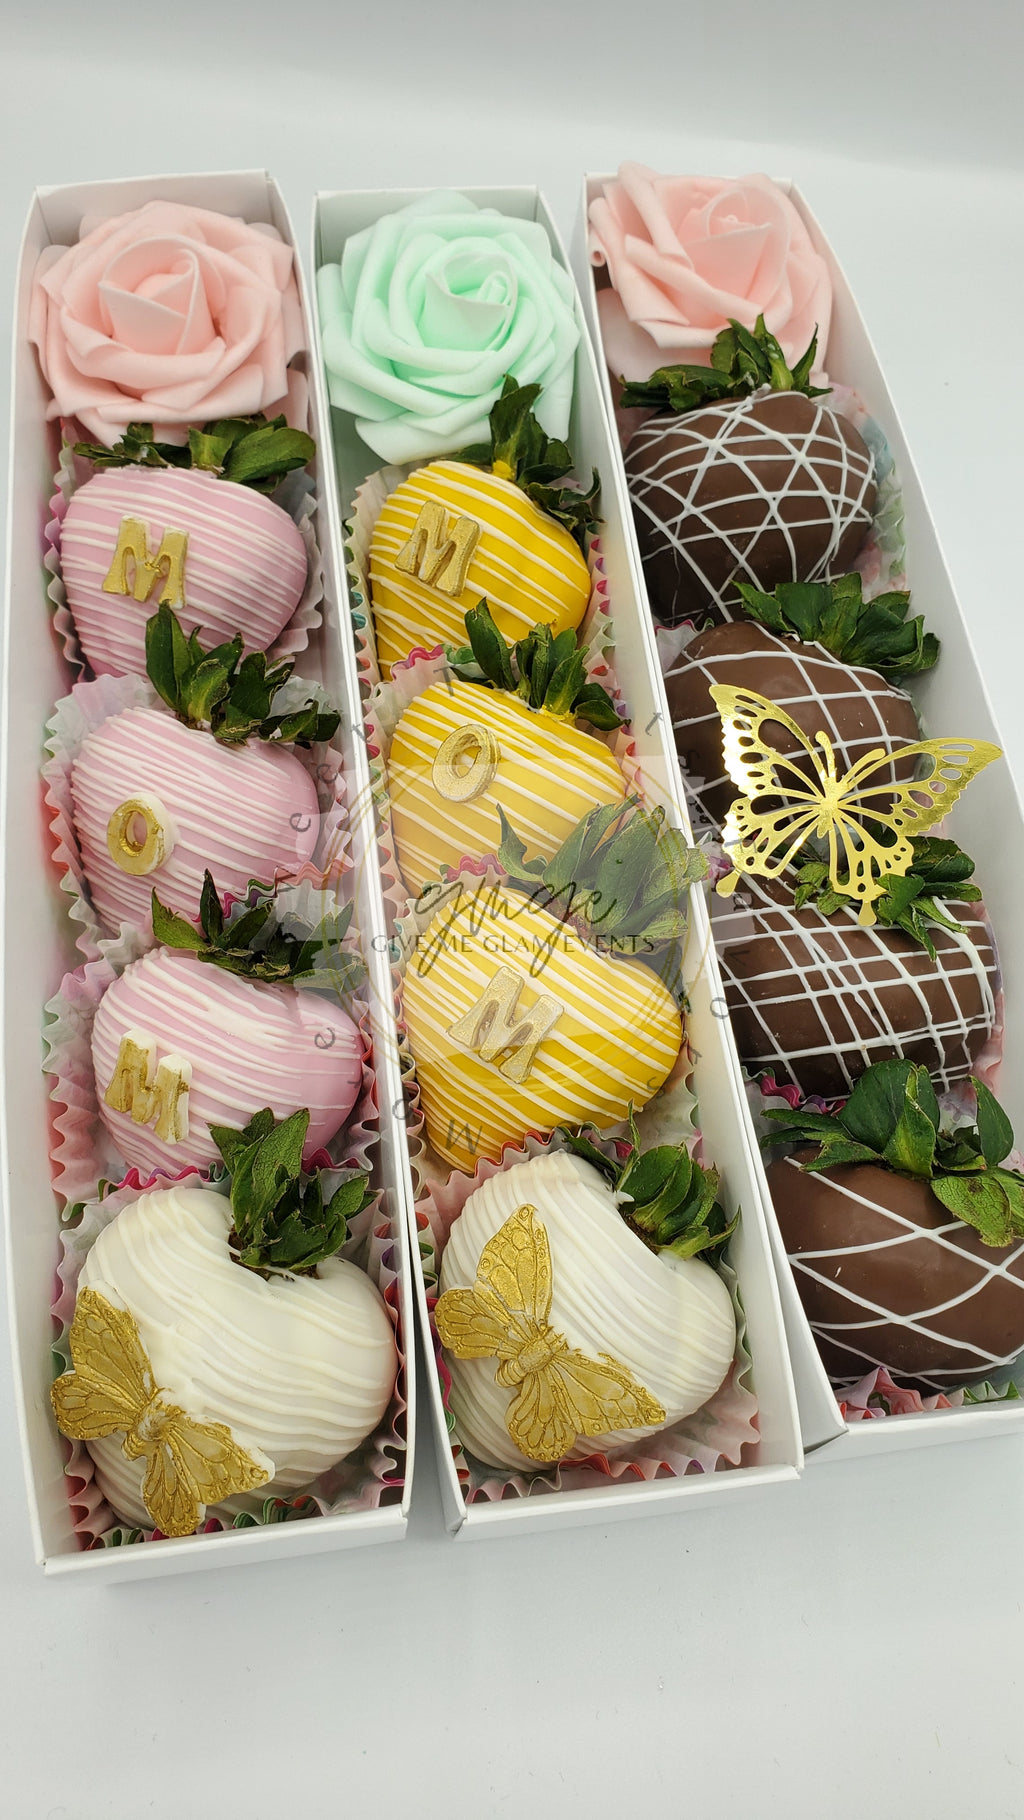 Mother's Day Single Rose or 5ct Chocolate Covered Strawberry Boxes (LOCAL PICKUP ONLY)